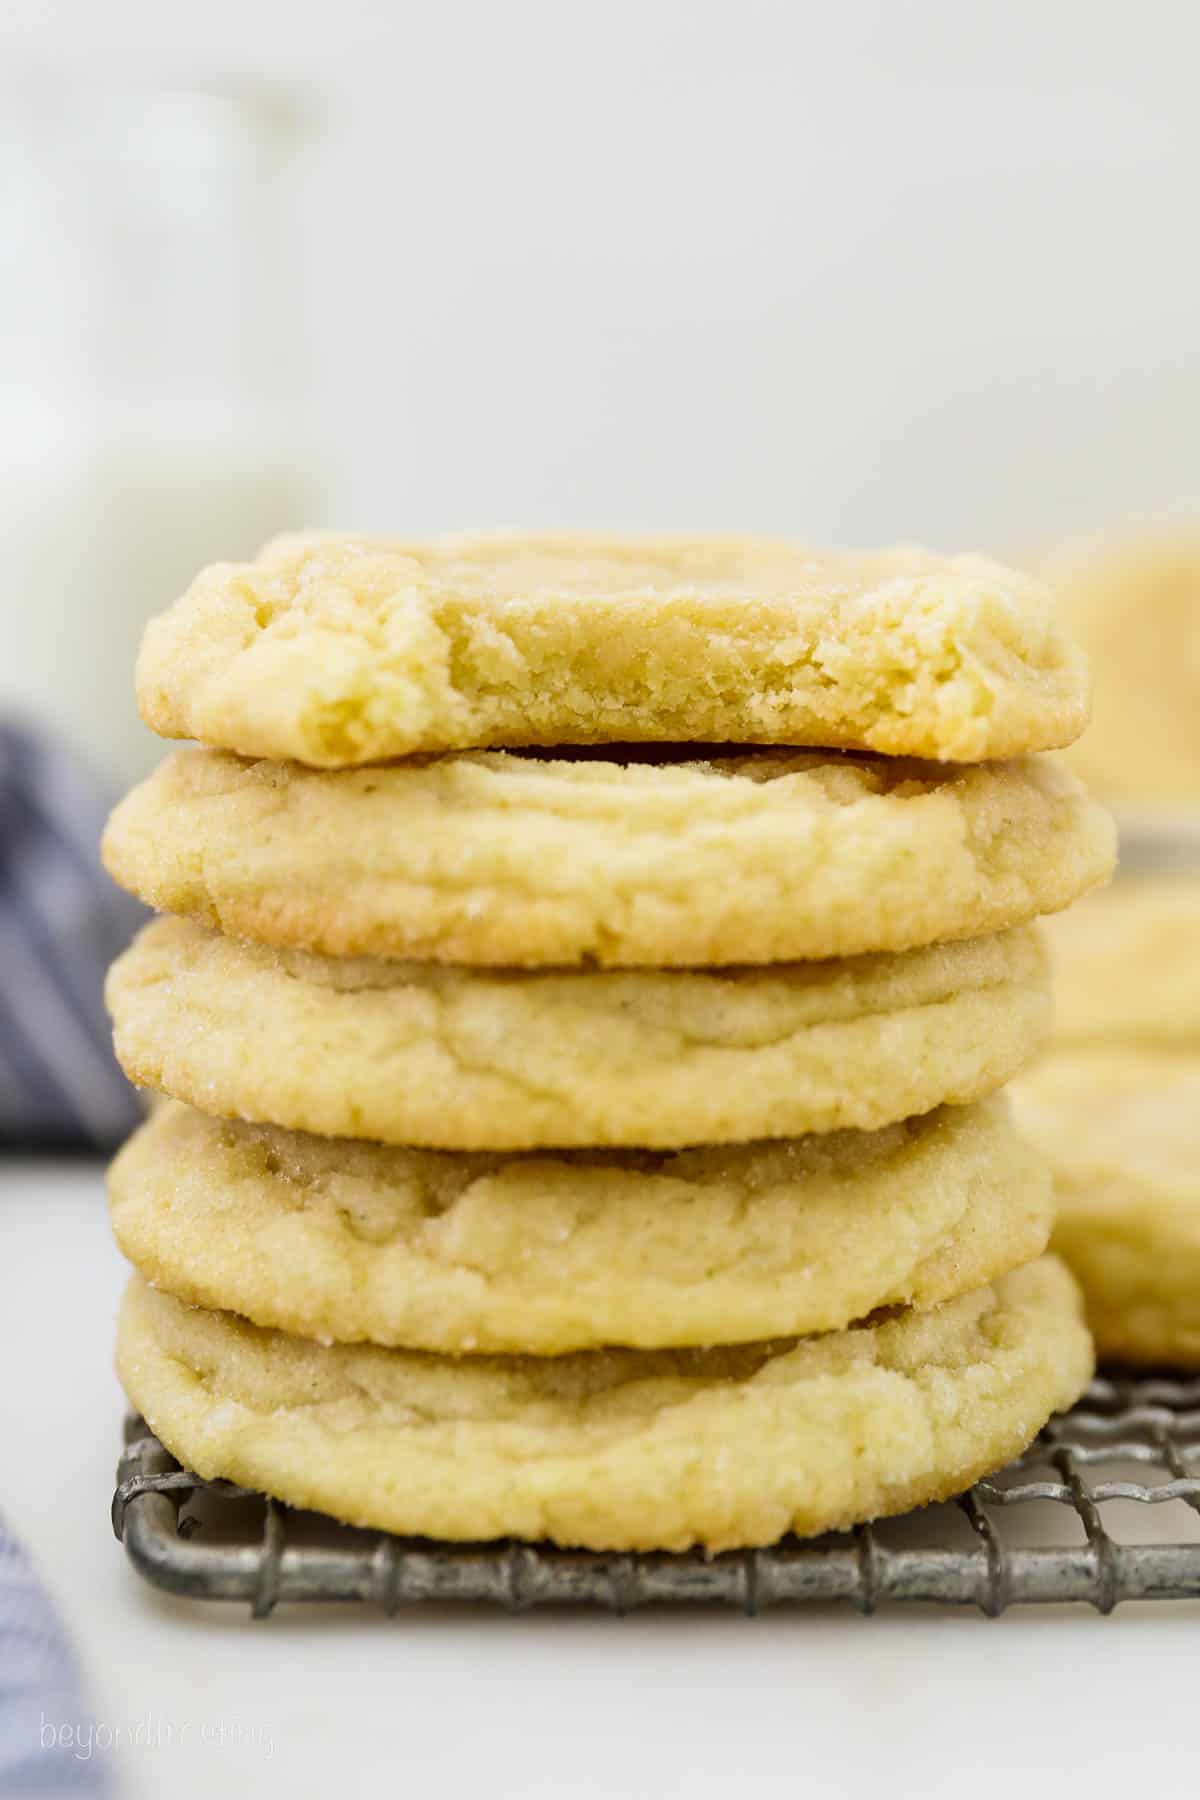 A stack of five soft sugar cookies with a bite missing from the top cookie.